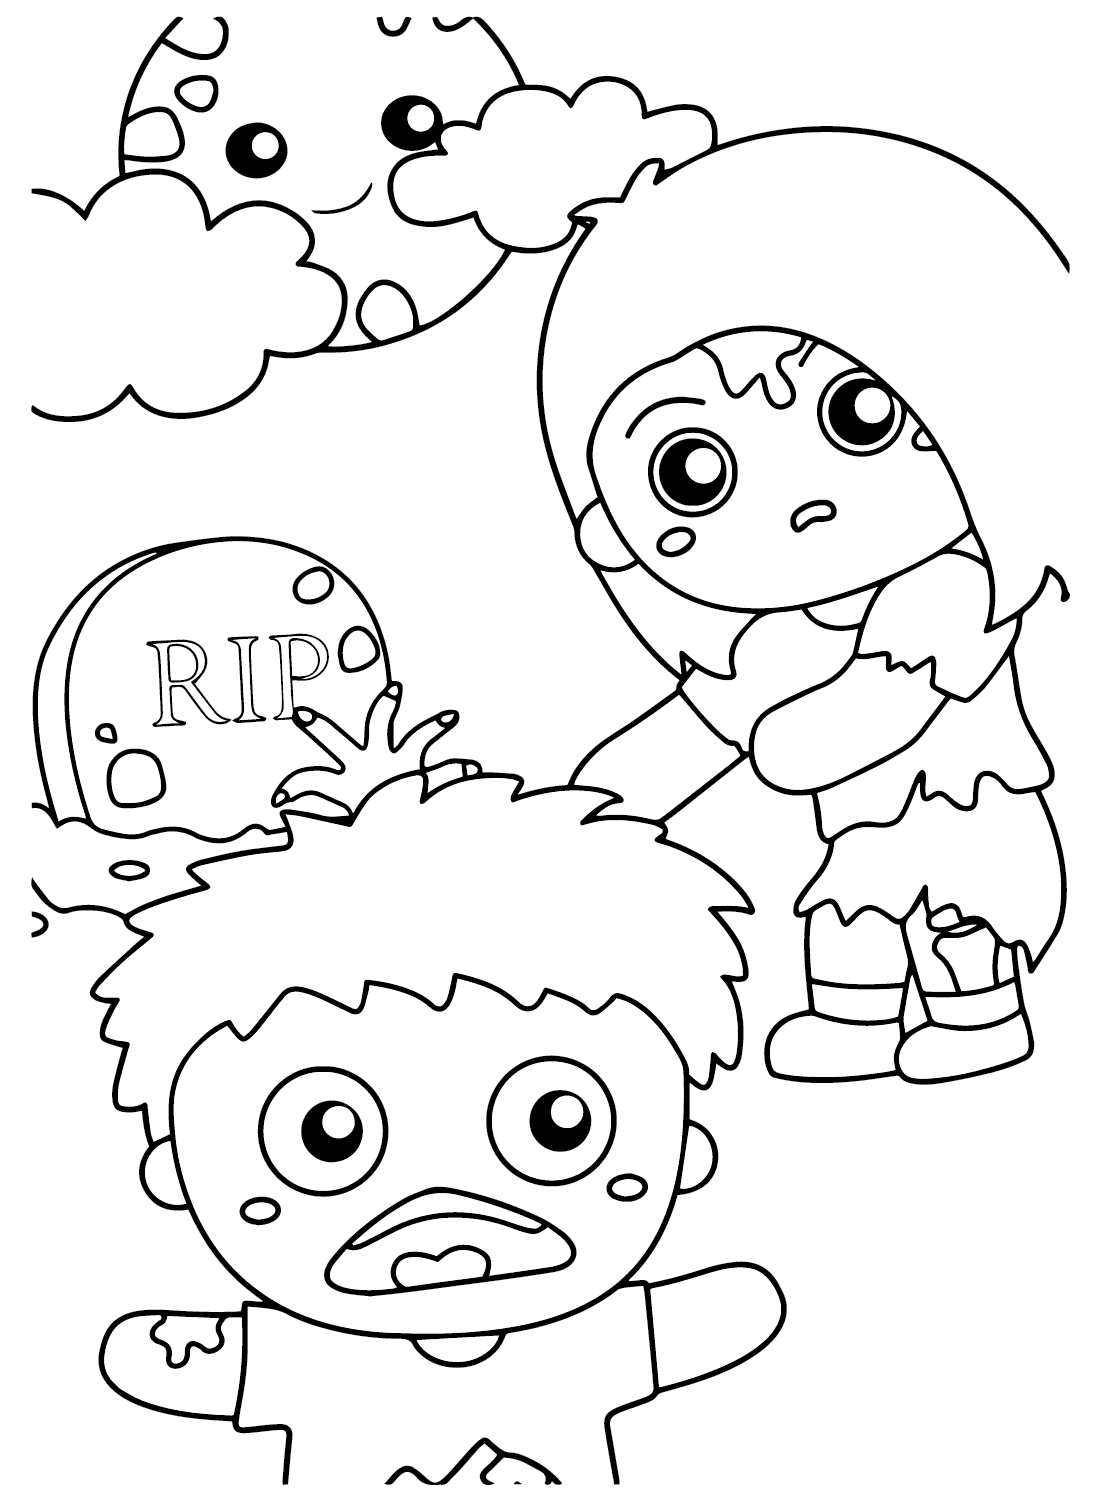 Coloring Page Halloween Costume Free from Halloween Costume